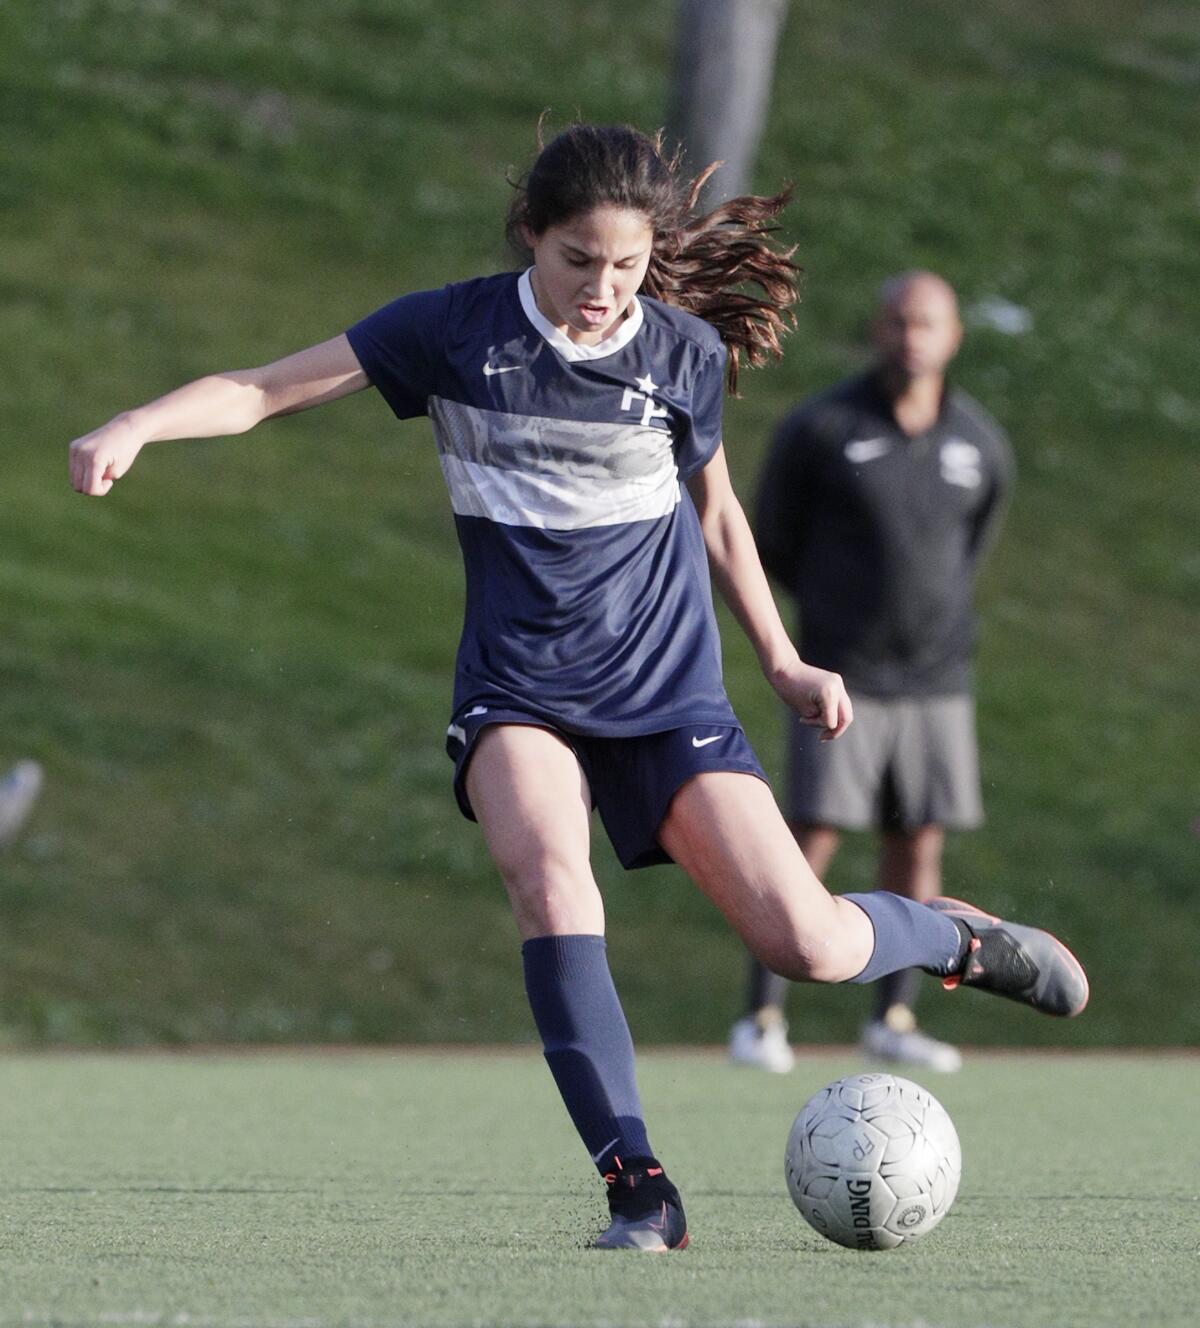 Flintridge Prep girls' soccer player Sage Shurman tallied 16 goals and 15 assists this season as a freshman midfielder en route to picking up All-CIF Southern Section Division III honors.